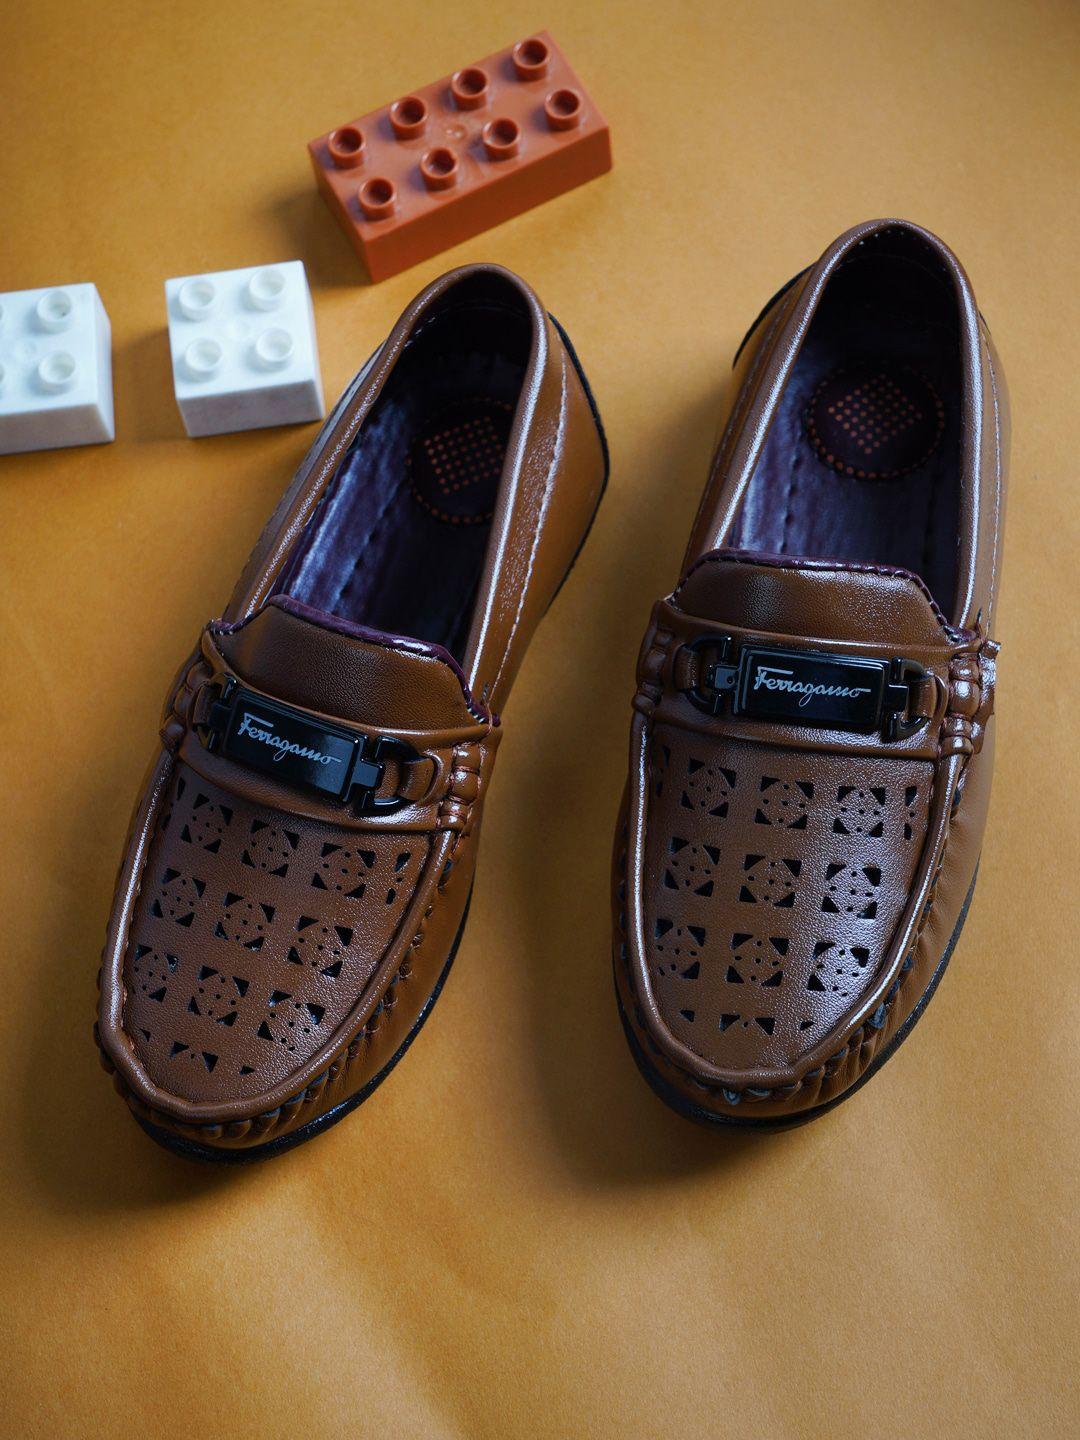 style shoes boys textured loafers